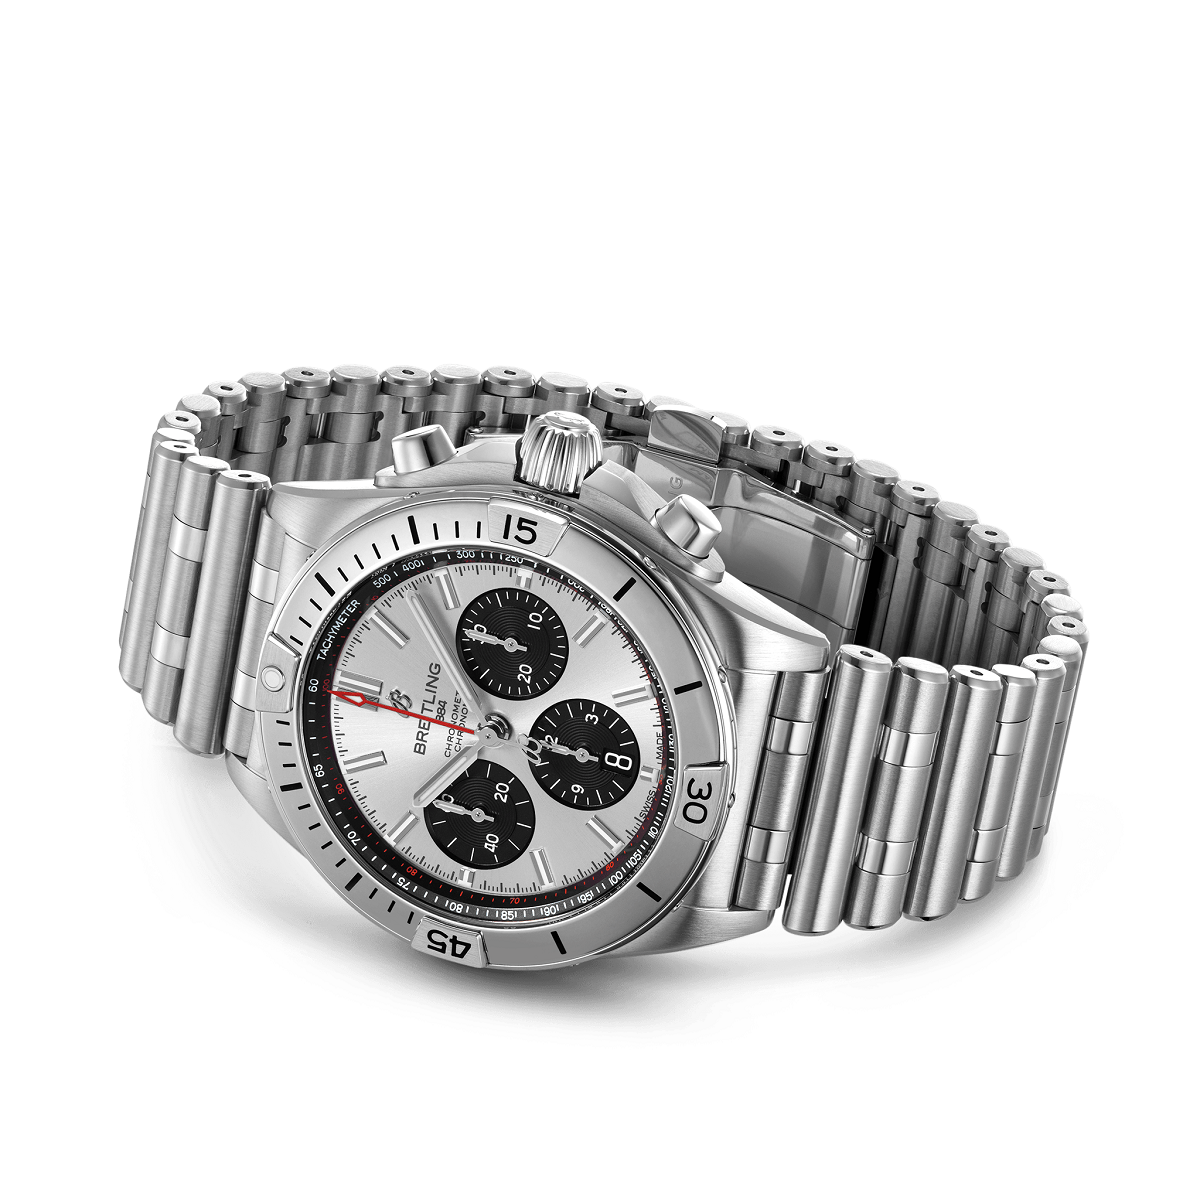 Breitling Chronomat B01 42MM - Stainless Steel - Silver - AB0134101G1A1